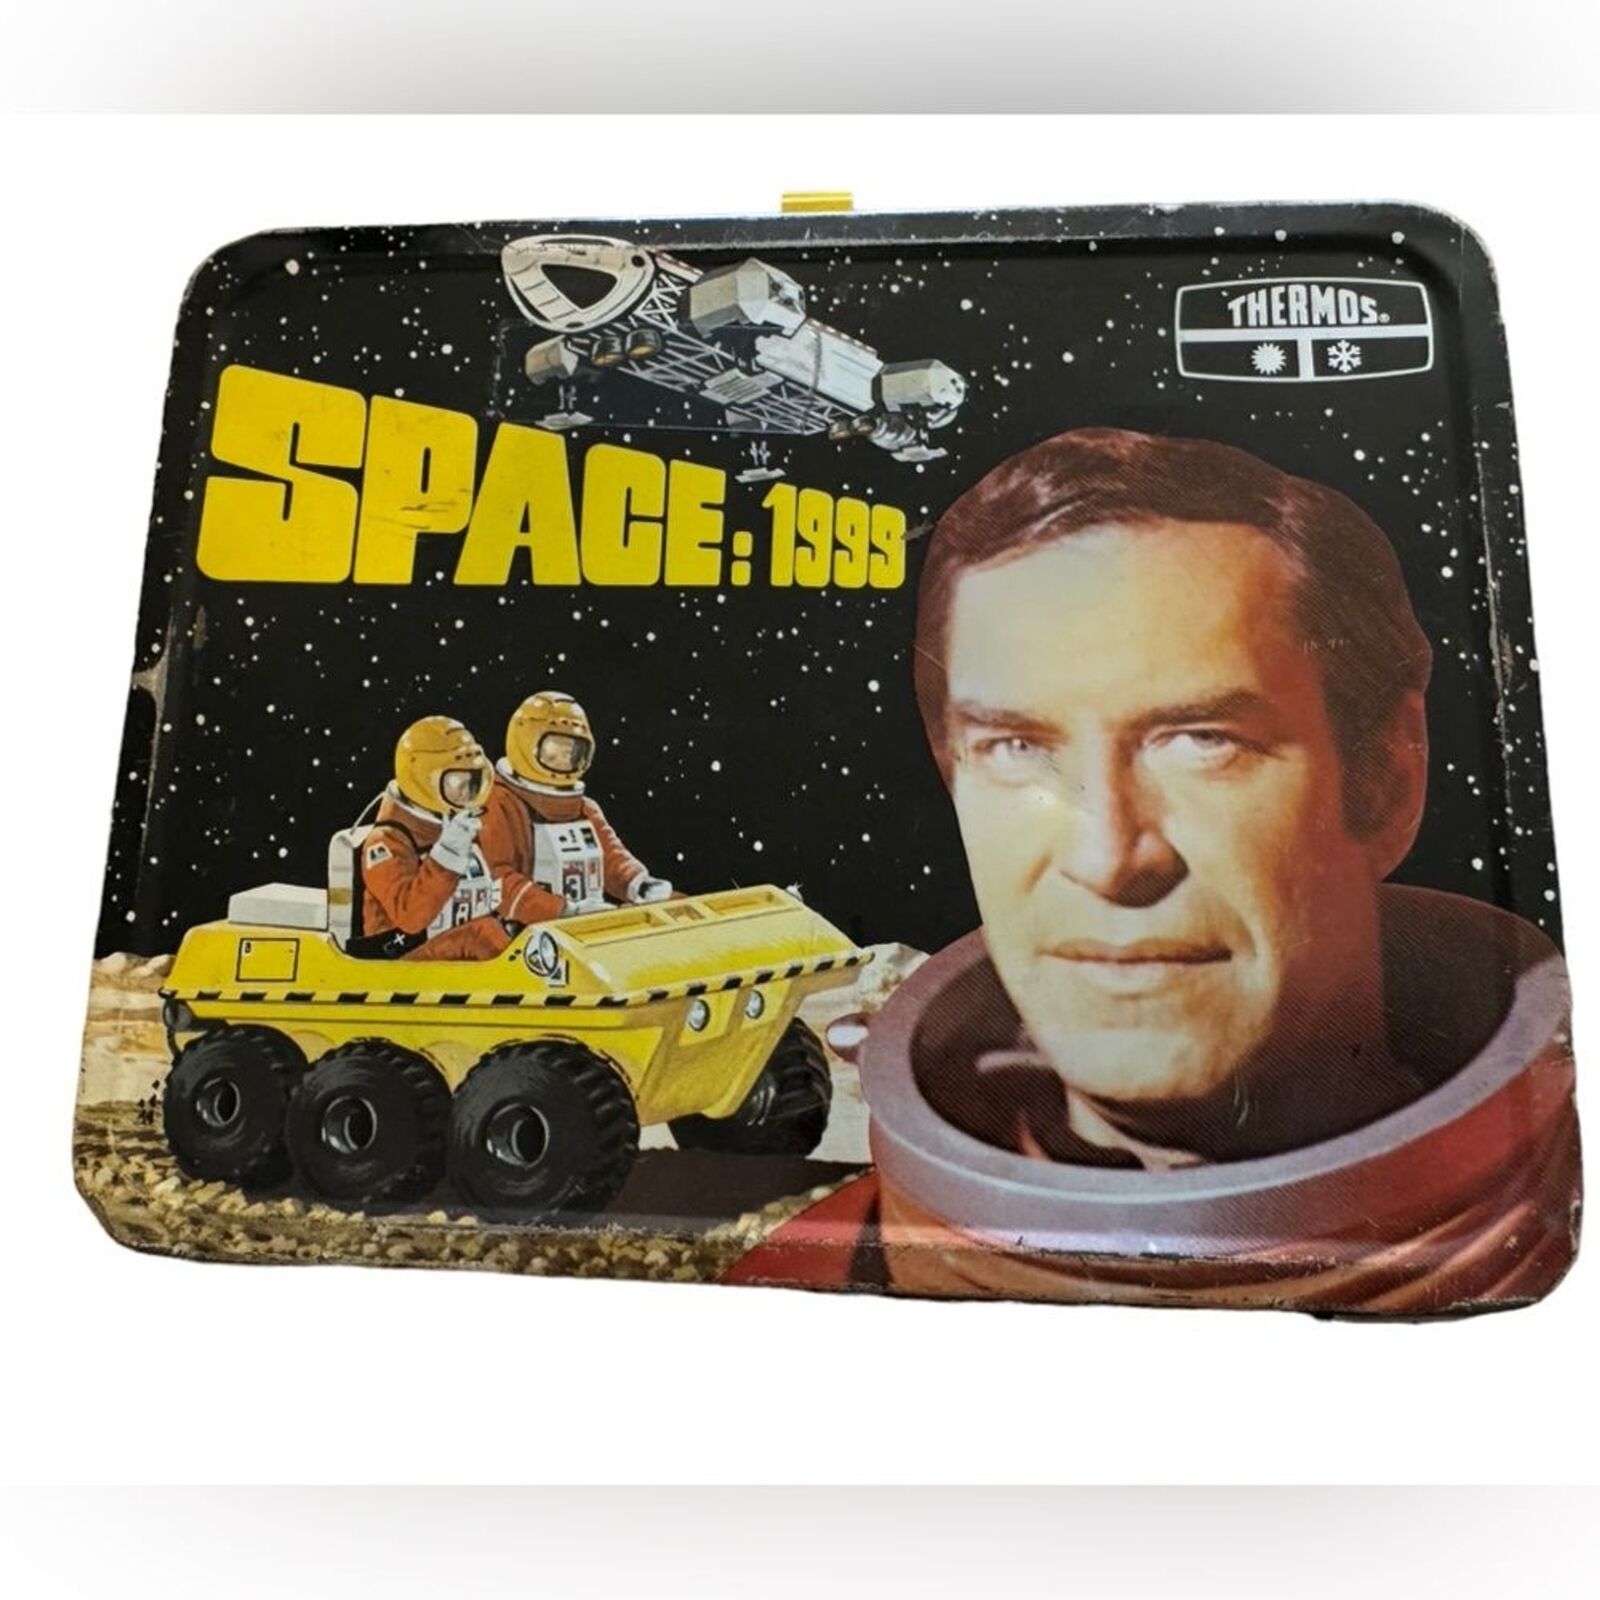 Vintage 1975 Space 1999 Sci Fi TV Show Metal Lunchbox by Thermos Rare